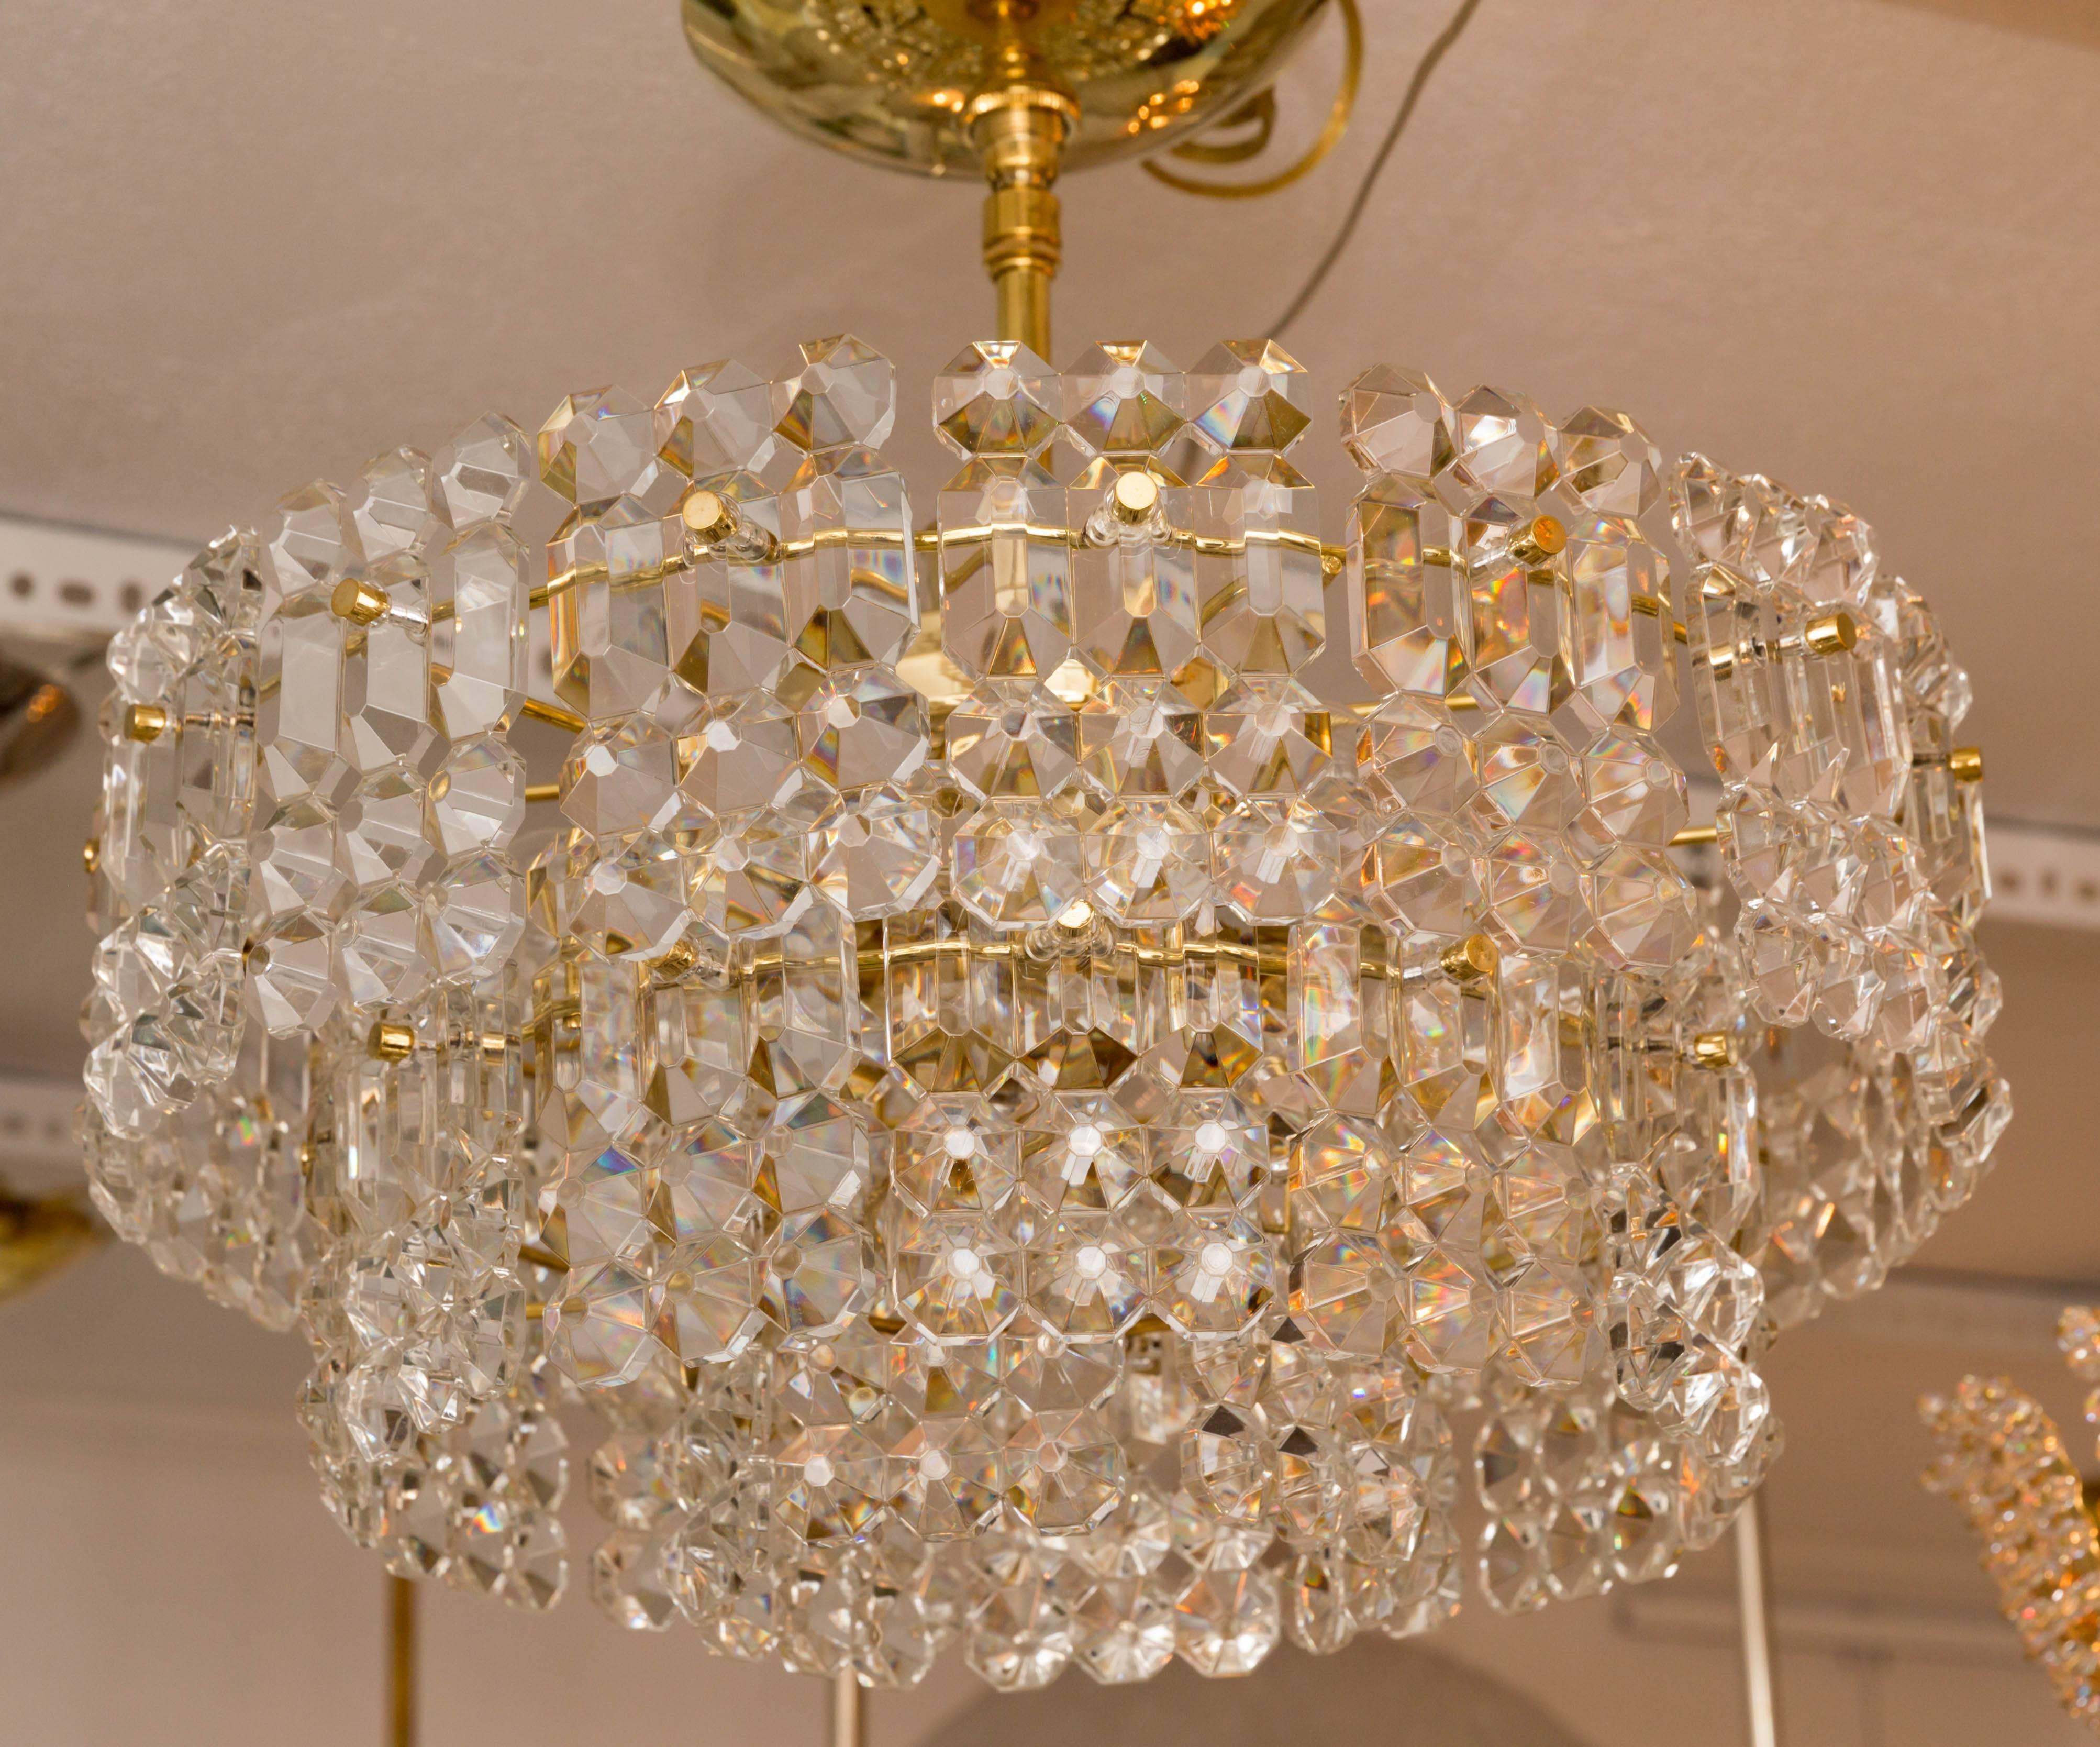 Two-tiered ceiling fixture composed of faceted glass panels with brass detail.